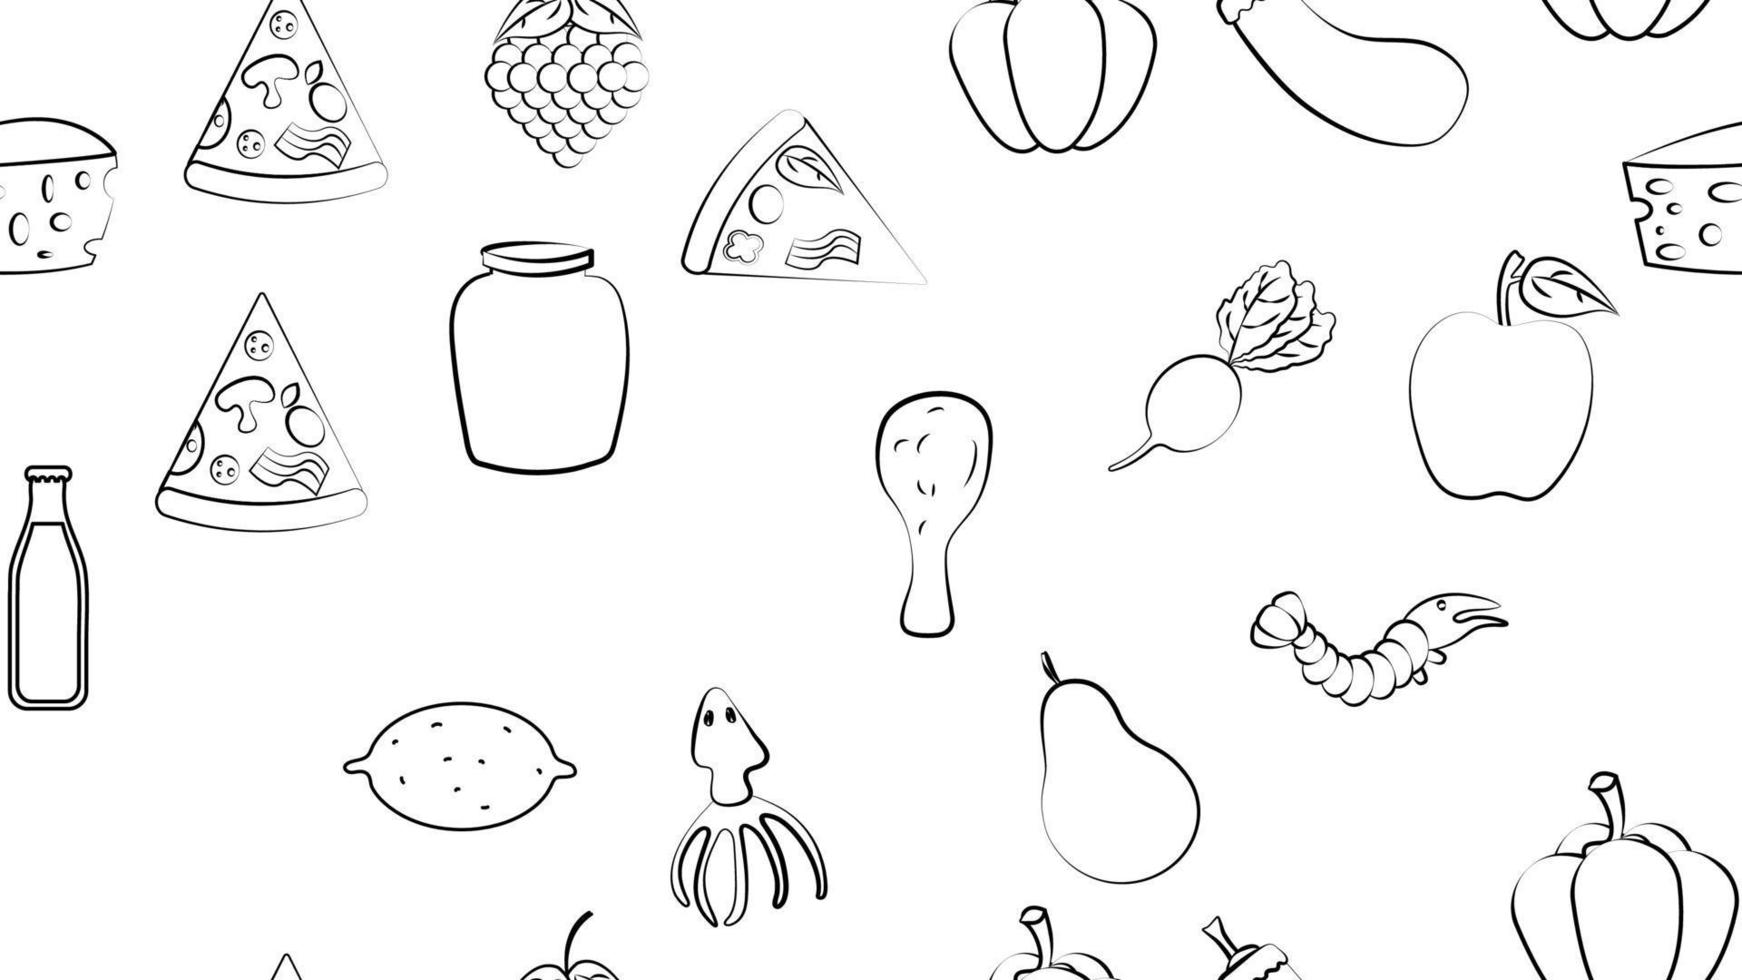 Black and white endless seamless pattern of food and snack items icons set for restaurant bar cafe shrimp, pizza, grapes, radish, soda, eggplant, squid, apple, cheese, lemon. The background vector